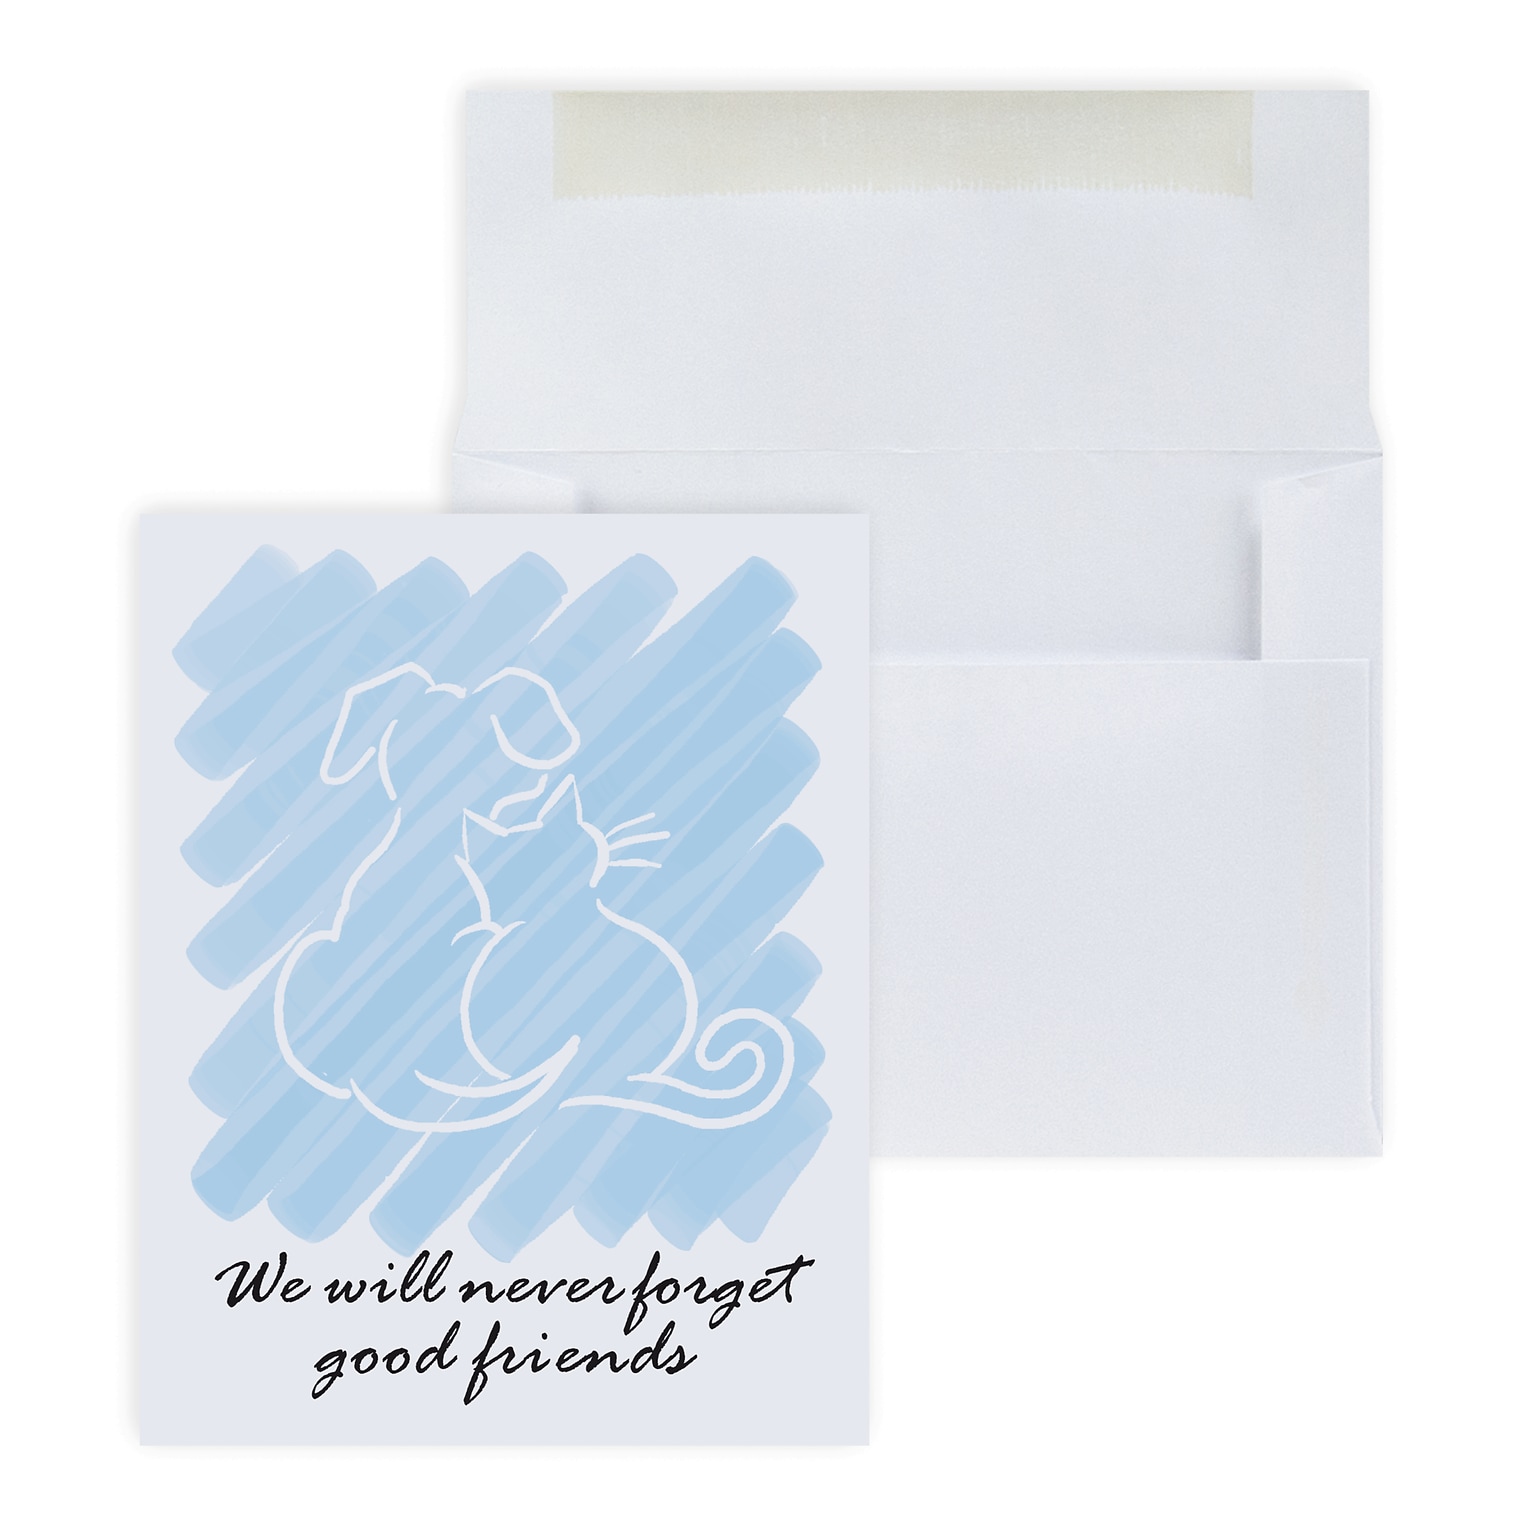 Custom Never Forget Good Friends Sympathy Cards, With Envelopes, 5-3/8 x 4-1/4, 25 Cards per Set